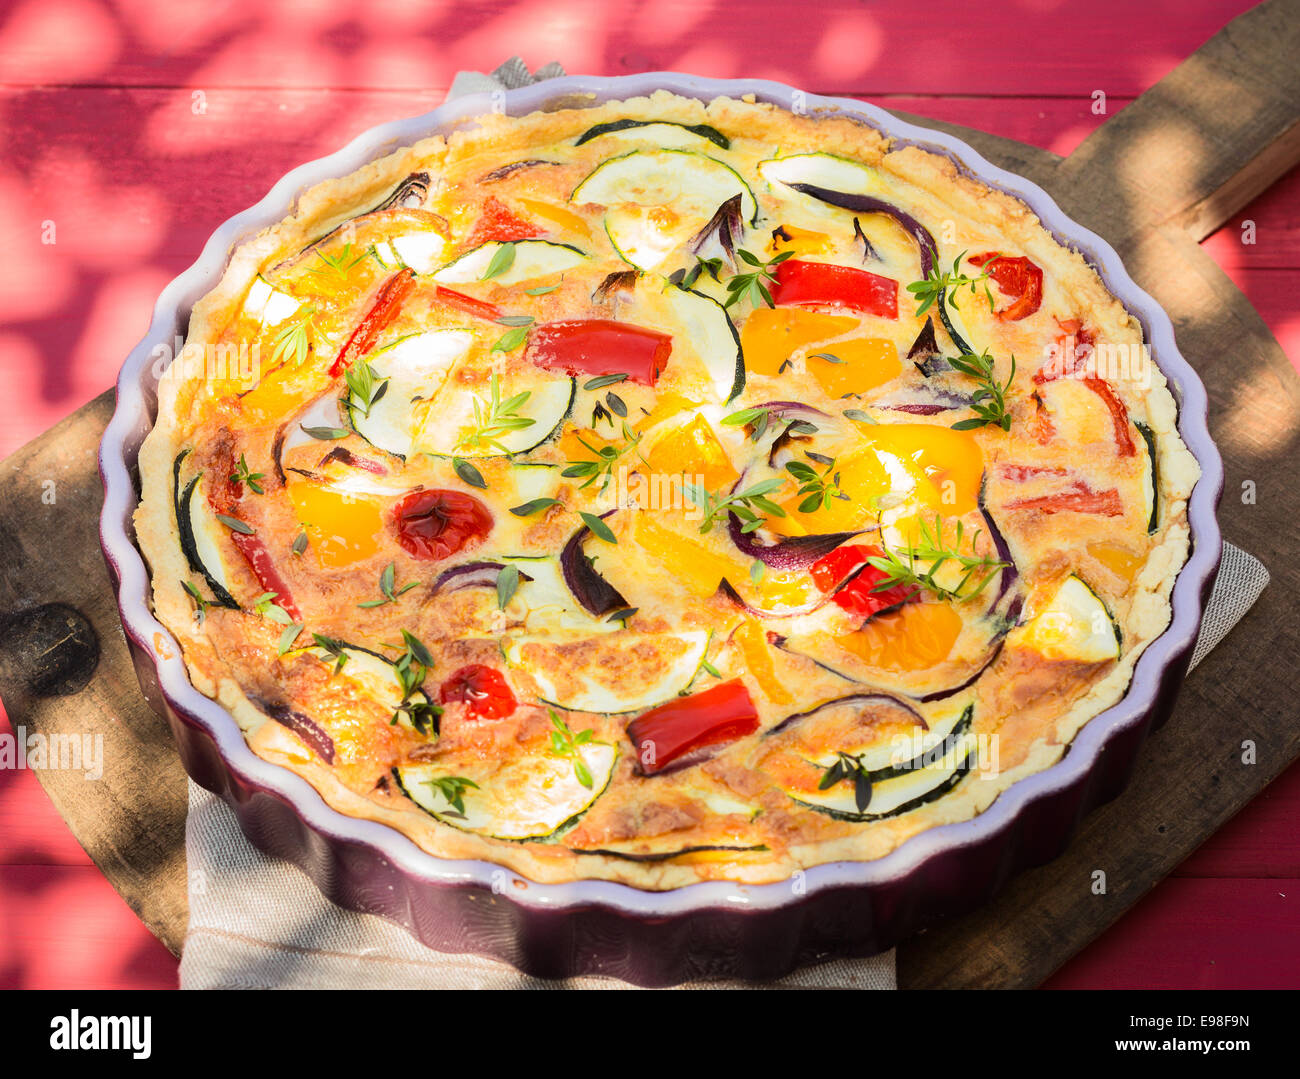 Delicious healthy vegetarian cuisine with a savory quiche with eggplant, peppers, egg custard, herbs and cheese in a decorative Stock Photo